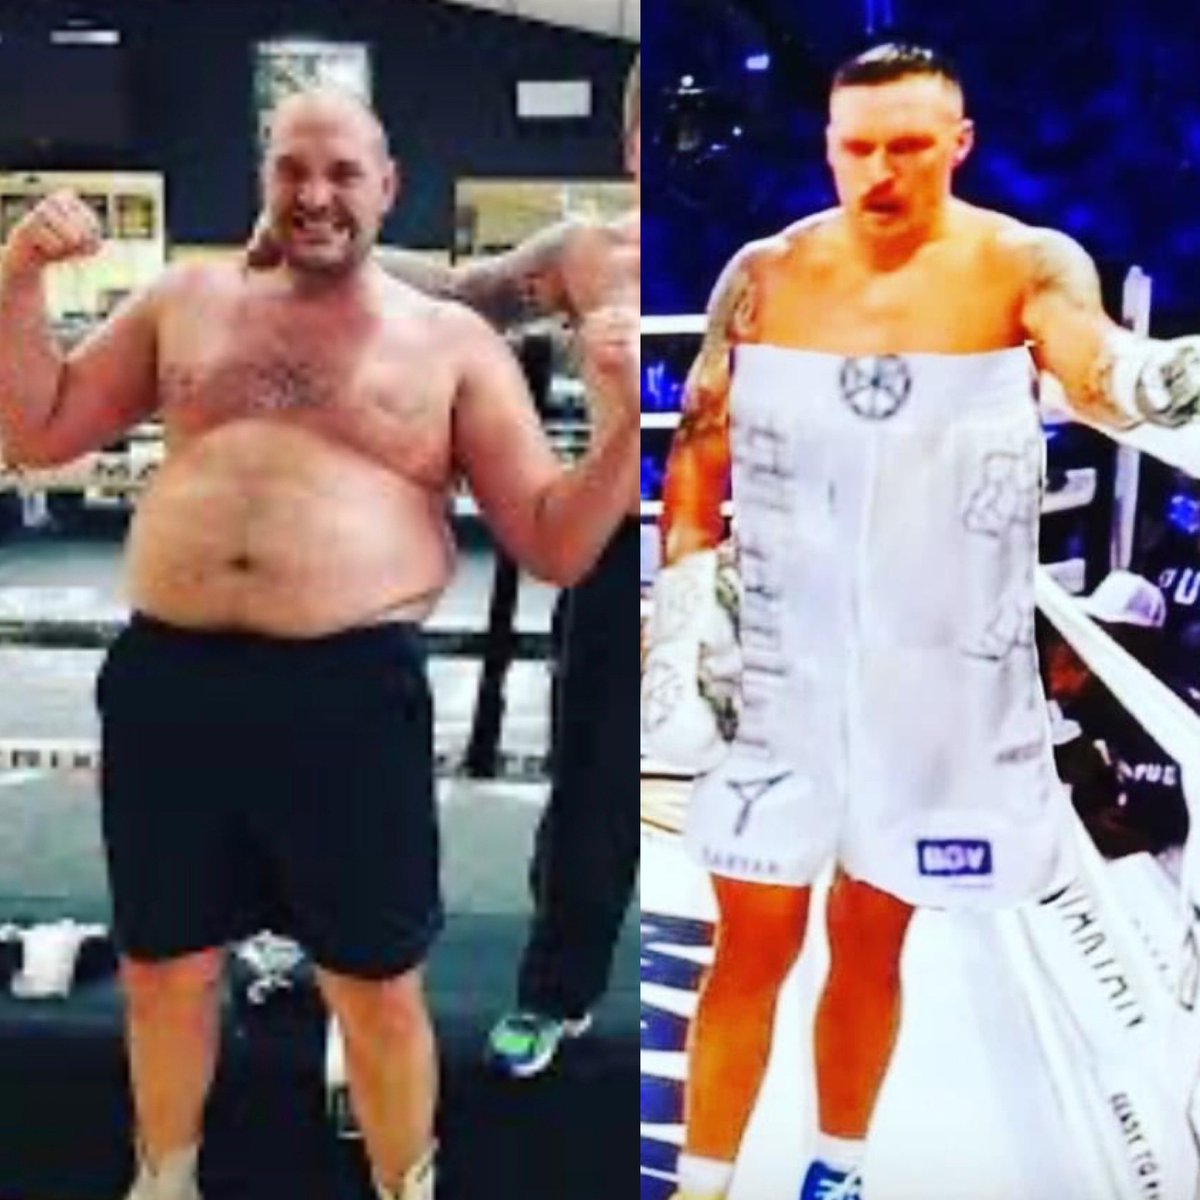 GREEDY BELLY vs GLASS BELLY 
FOR THE HEAVYWEIGHT CIRCUSHIP OF THE WORLD!

LETS GET IT ON!

#TysonFury #OleksandrUsyk #UsykDubios #FuryvsUsyk #GreedyBelly #GlassBelly